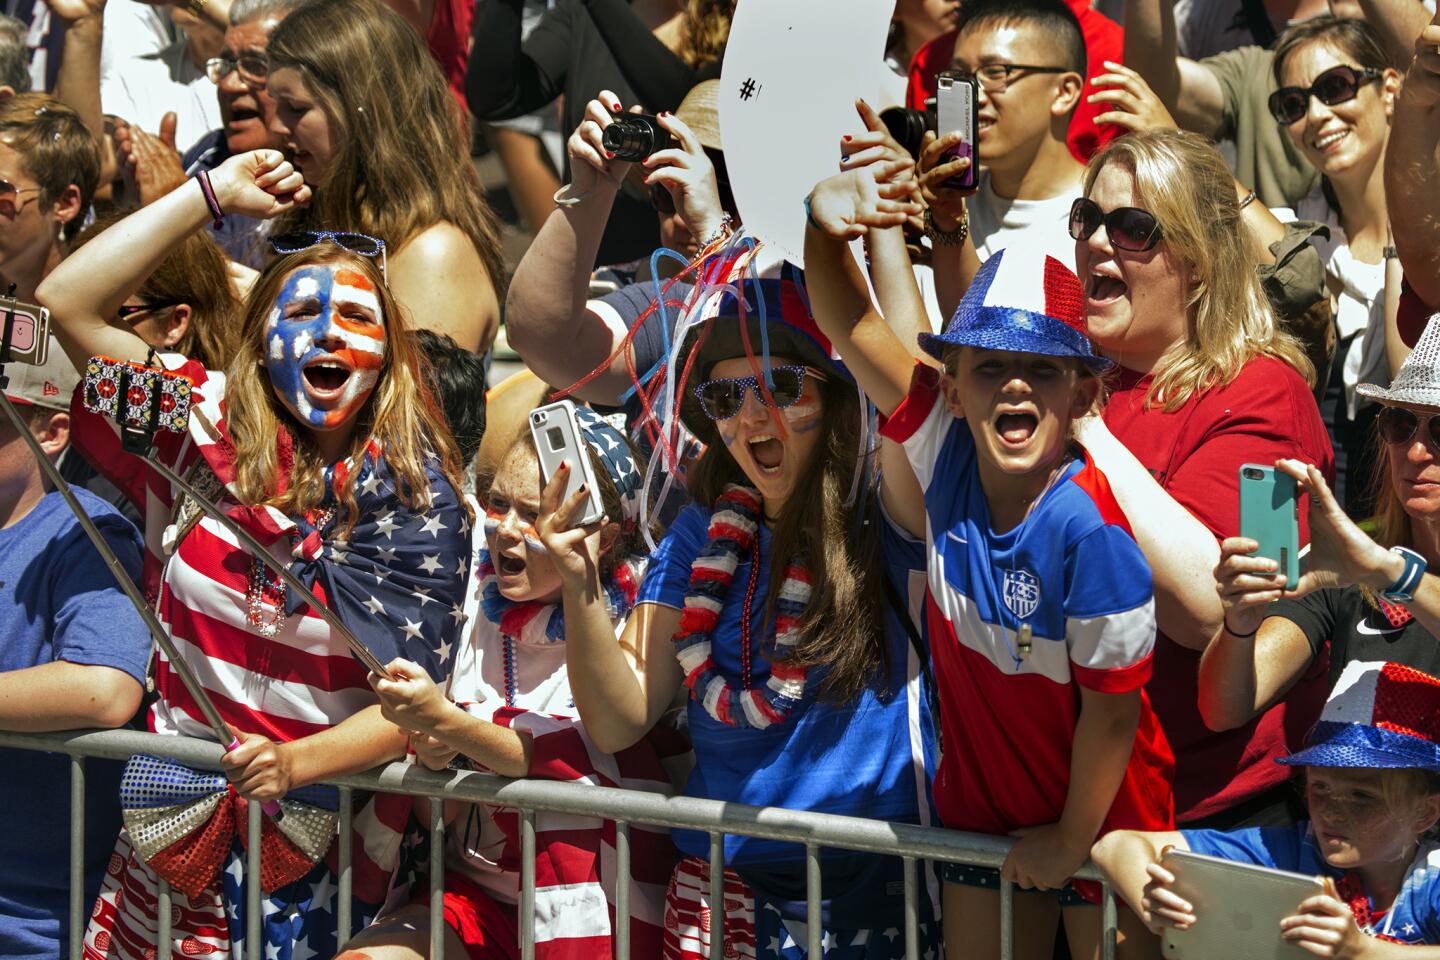 Picture takers were out in abundance for the parade honoring the World Cup championship U.S. women's soccer team.